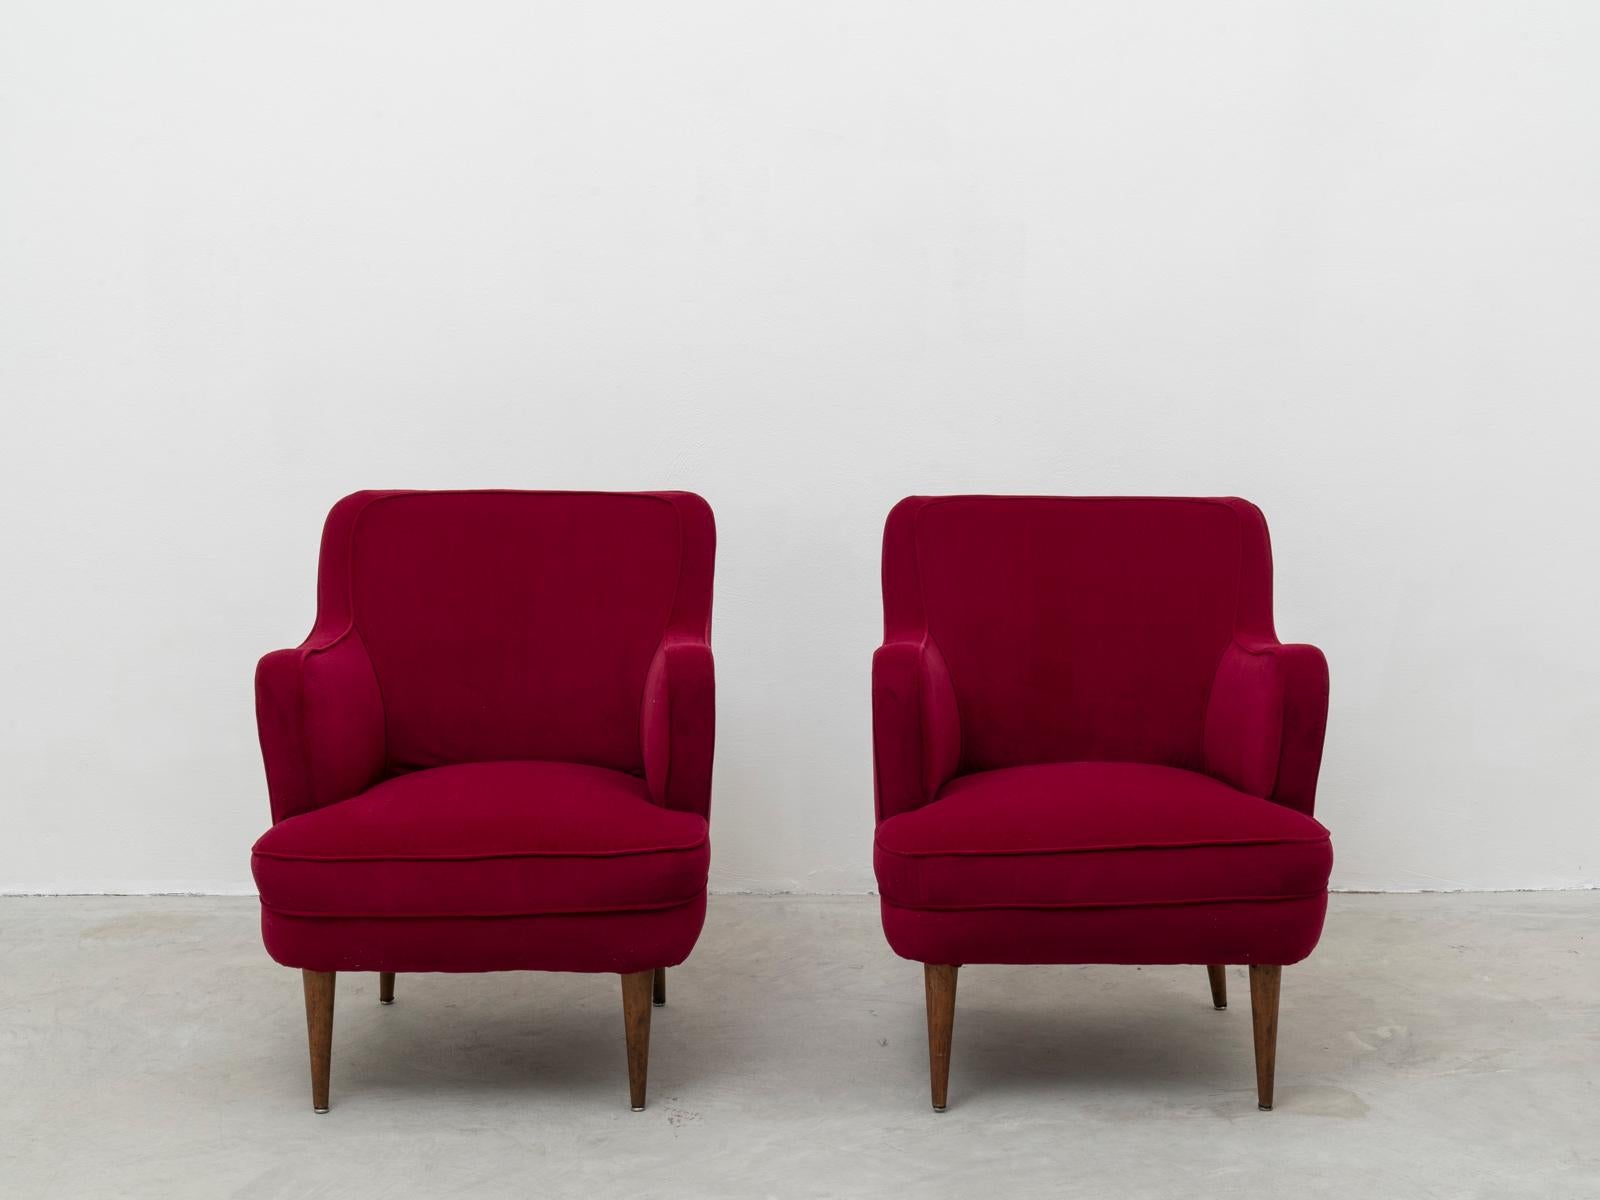 This pair of armchairs was designed by Italian architect Gustavo Pulitzer Finali for Cassina in 1954-1955. Pulitzer Finali, a peer of Gio Ponti and Antonio Cassi Ramelli renown for his nautical furnishing, has used this model to furnish the lounge